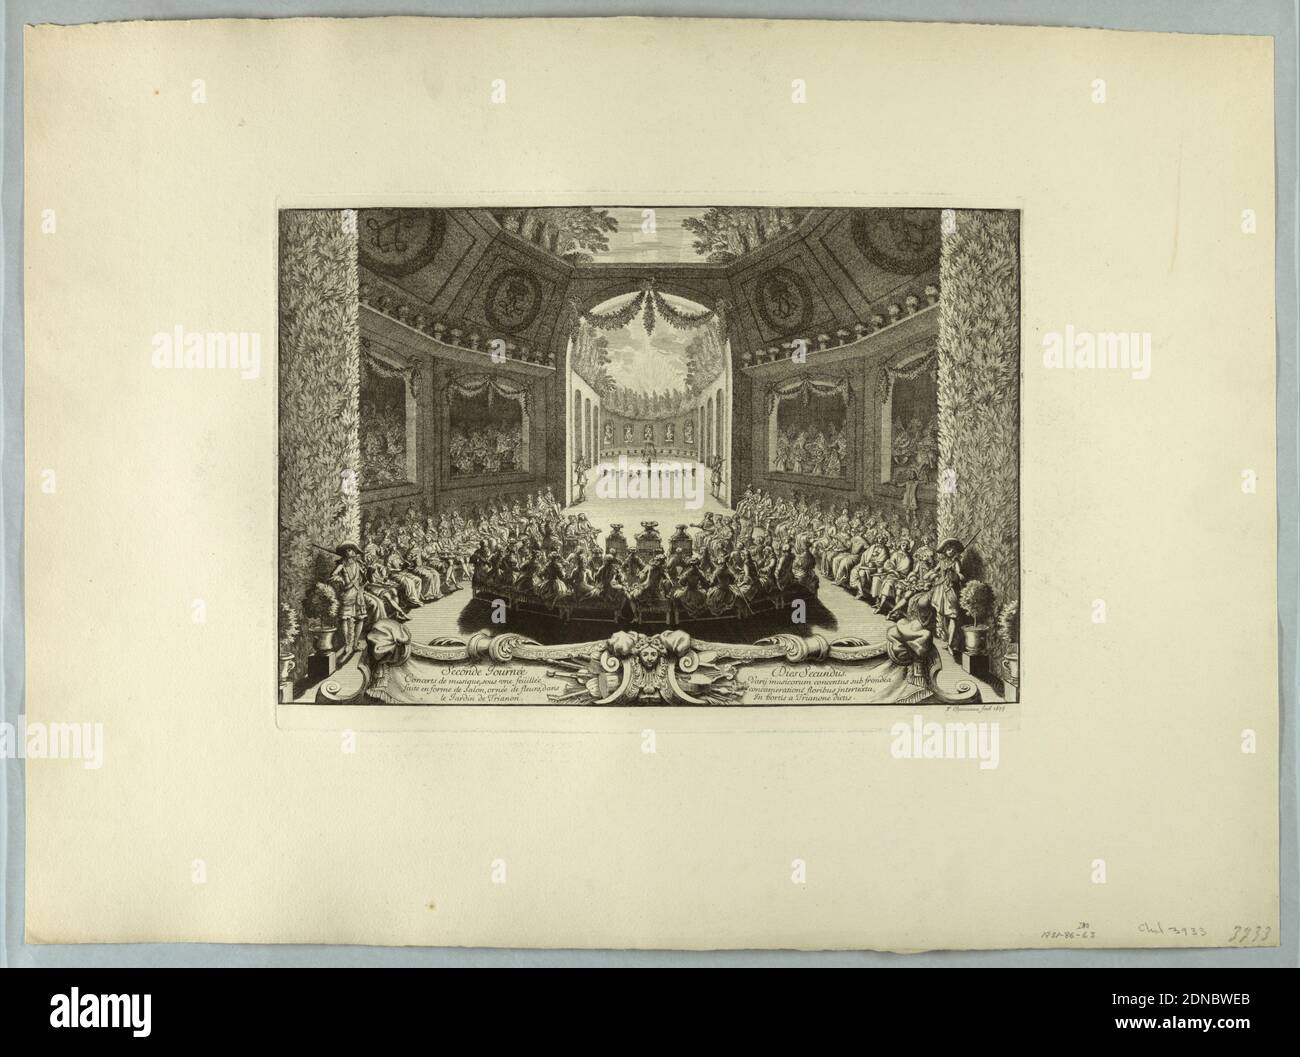 Chateau Gardens, Outdoor Concert, François Chauveau, 1613 – 1676, Black ink on rolled paper, Horizontal rectangle: In the foreground a banner and above and at sides, the audience surrounded by niches walls. At center, the stage. Beyond, a fountain and staturary., France, 1675, Print Stock Photo